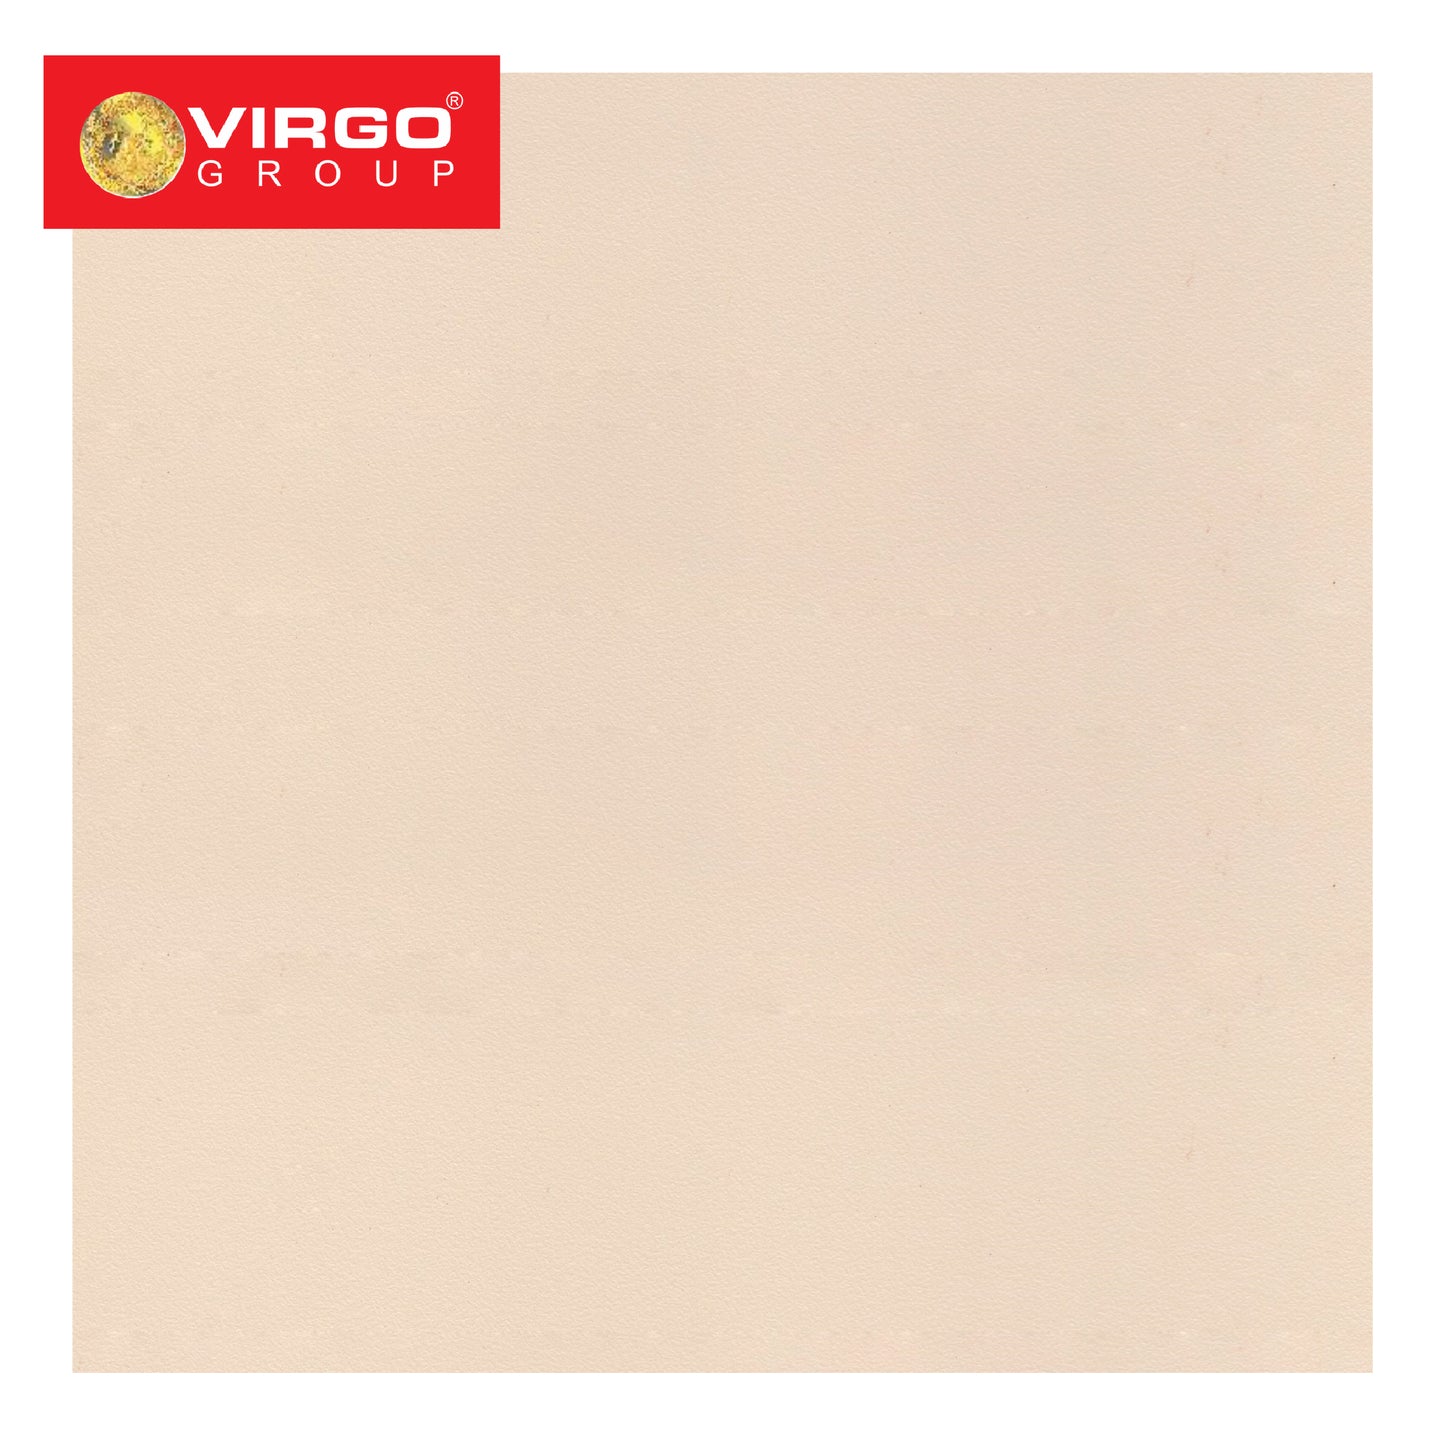 Virgo Decorative Laminates Without Barrier Paper Size 2440x1220mm  & 0.80mm Thickness Standard Suede Finish - 1303SF